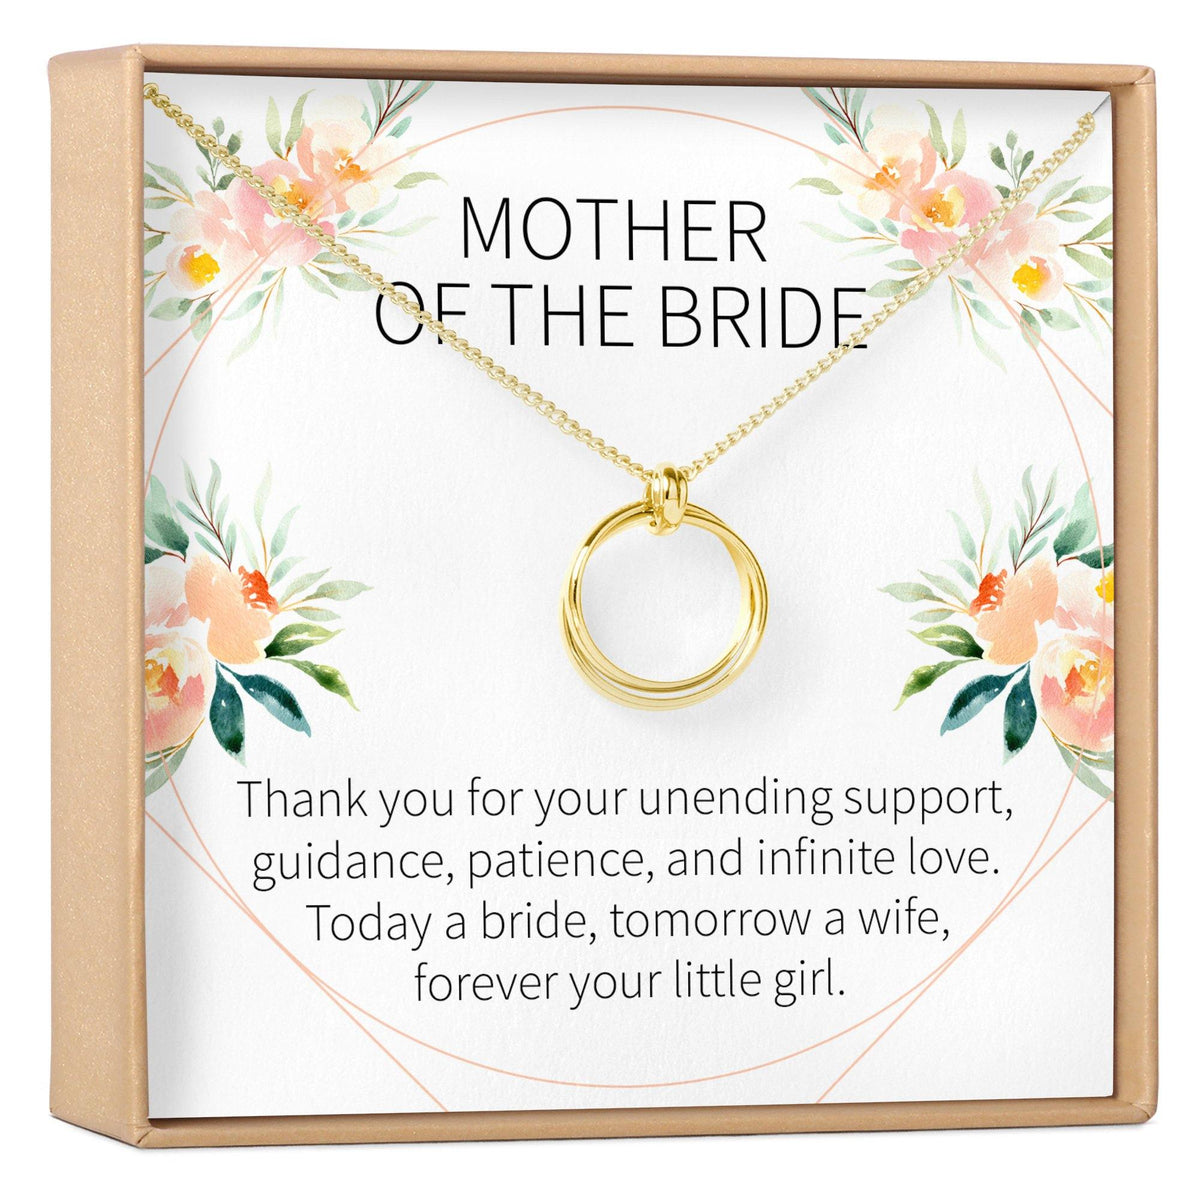 Mother of the Bride Necklace - Dear Ava, Jewelry / Necklaces / Pendants